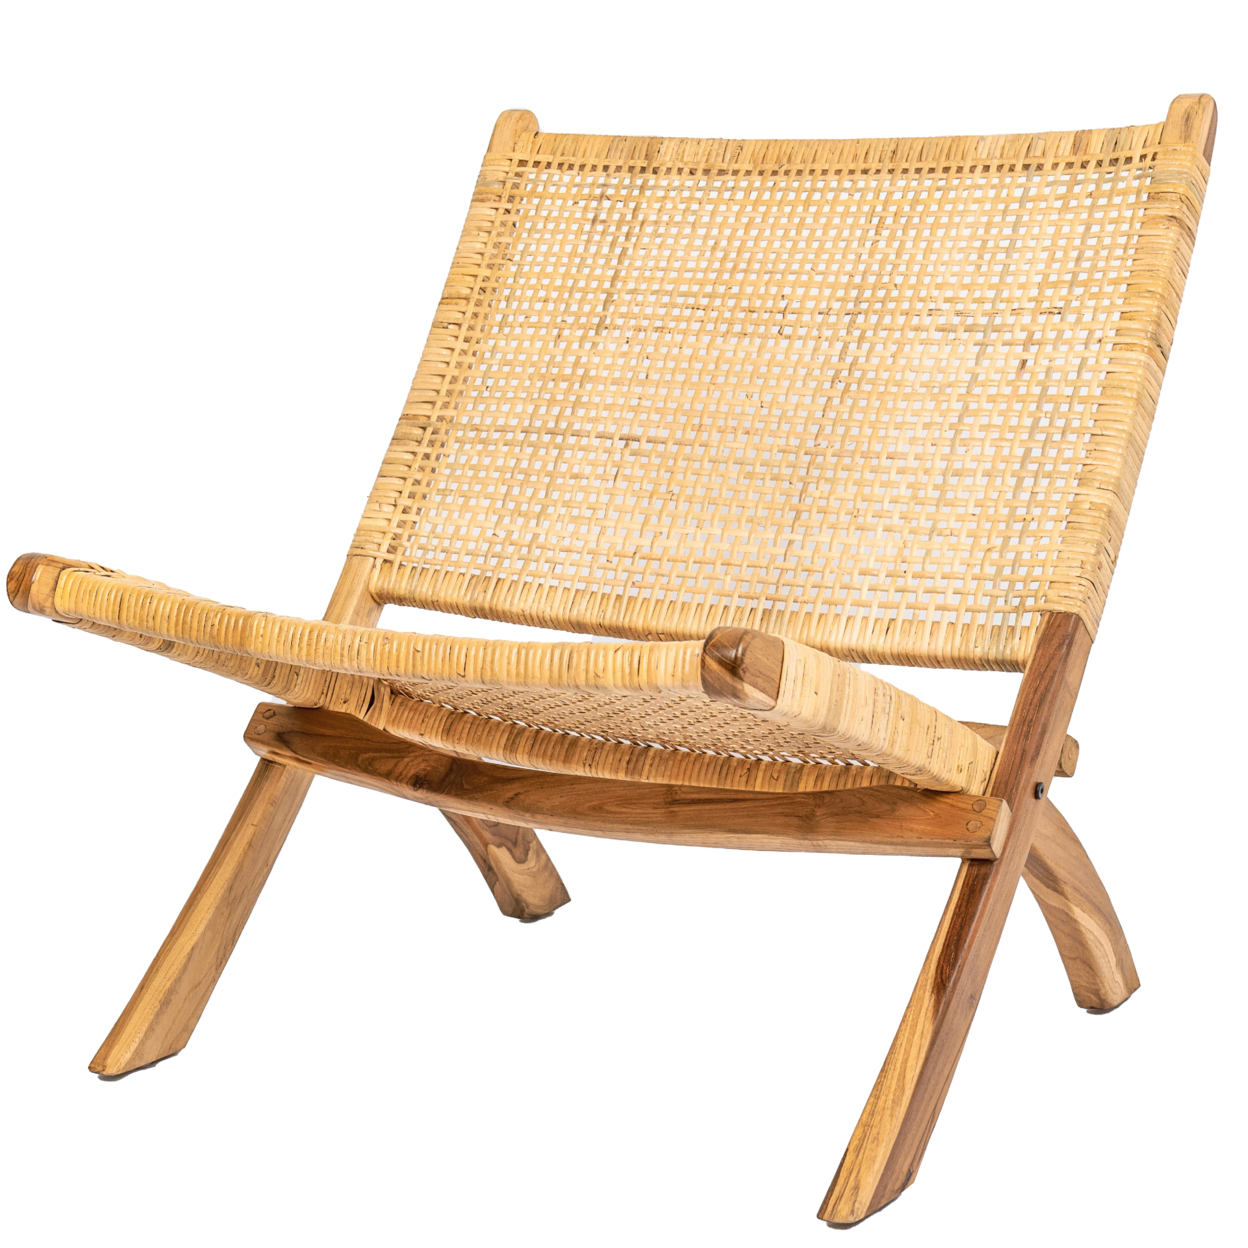 Decorative Natural Foldable Rattan And Teak Wood Chair For Indoor And Outdoor